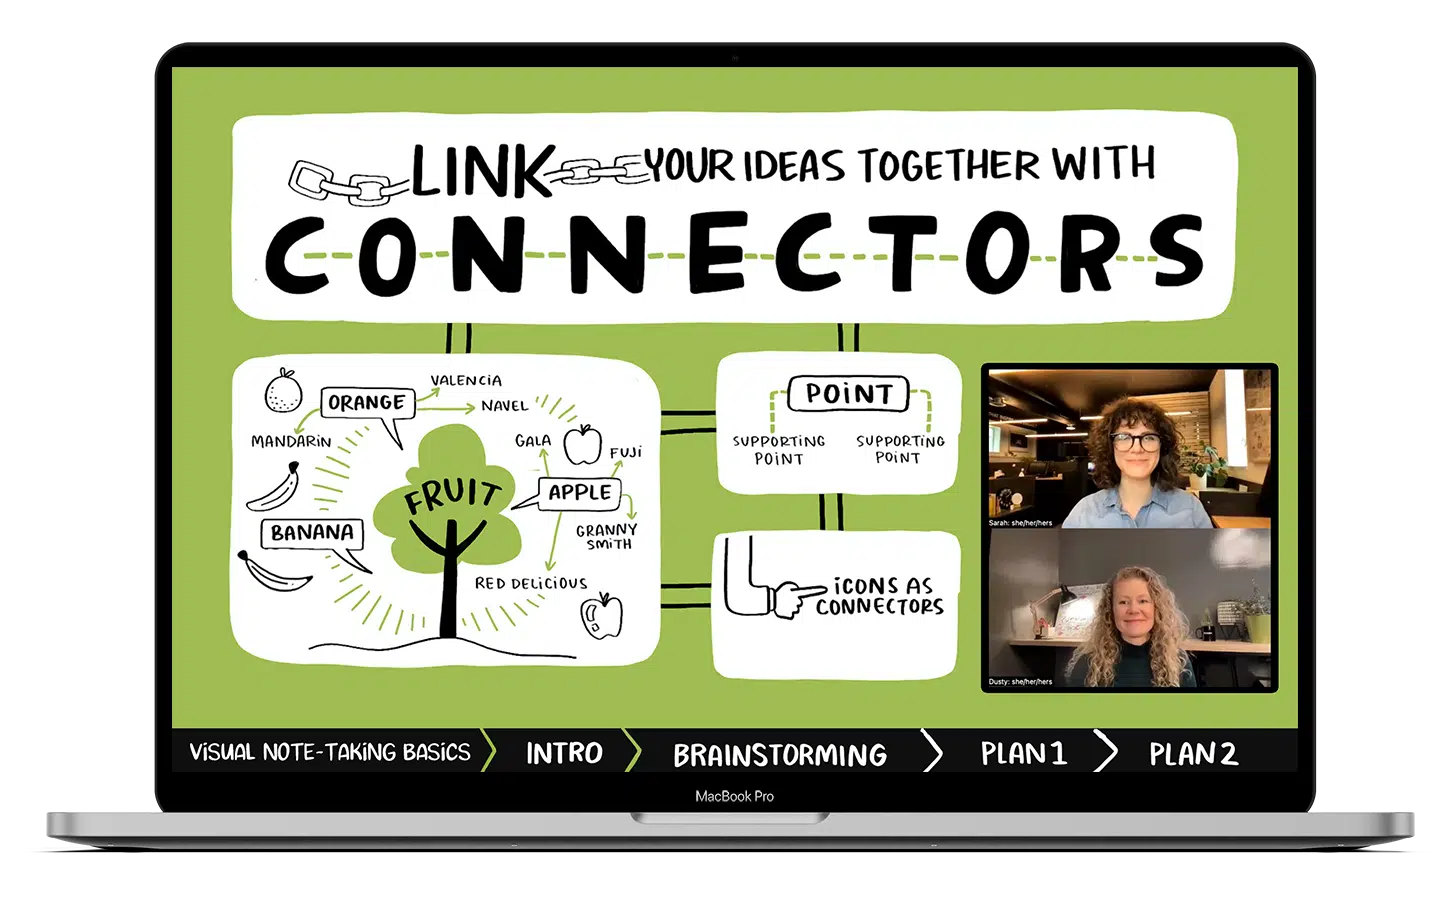 People learn visual note-taking in an online course